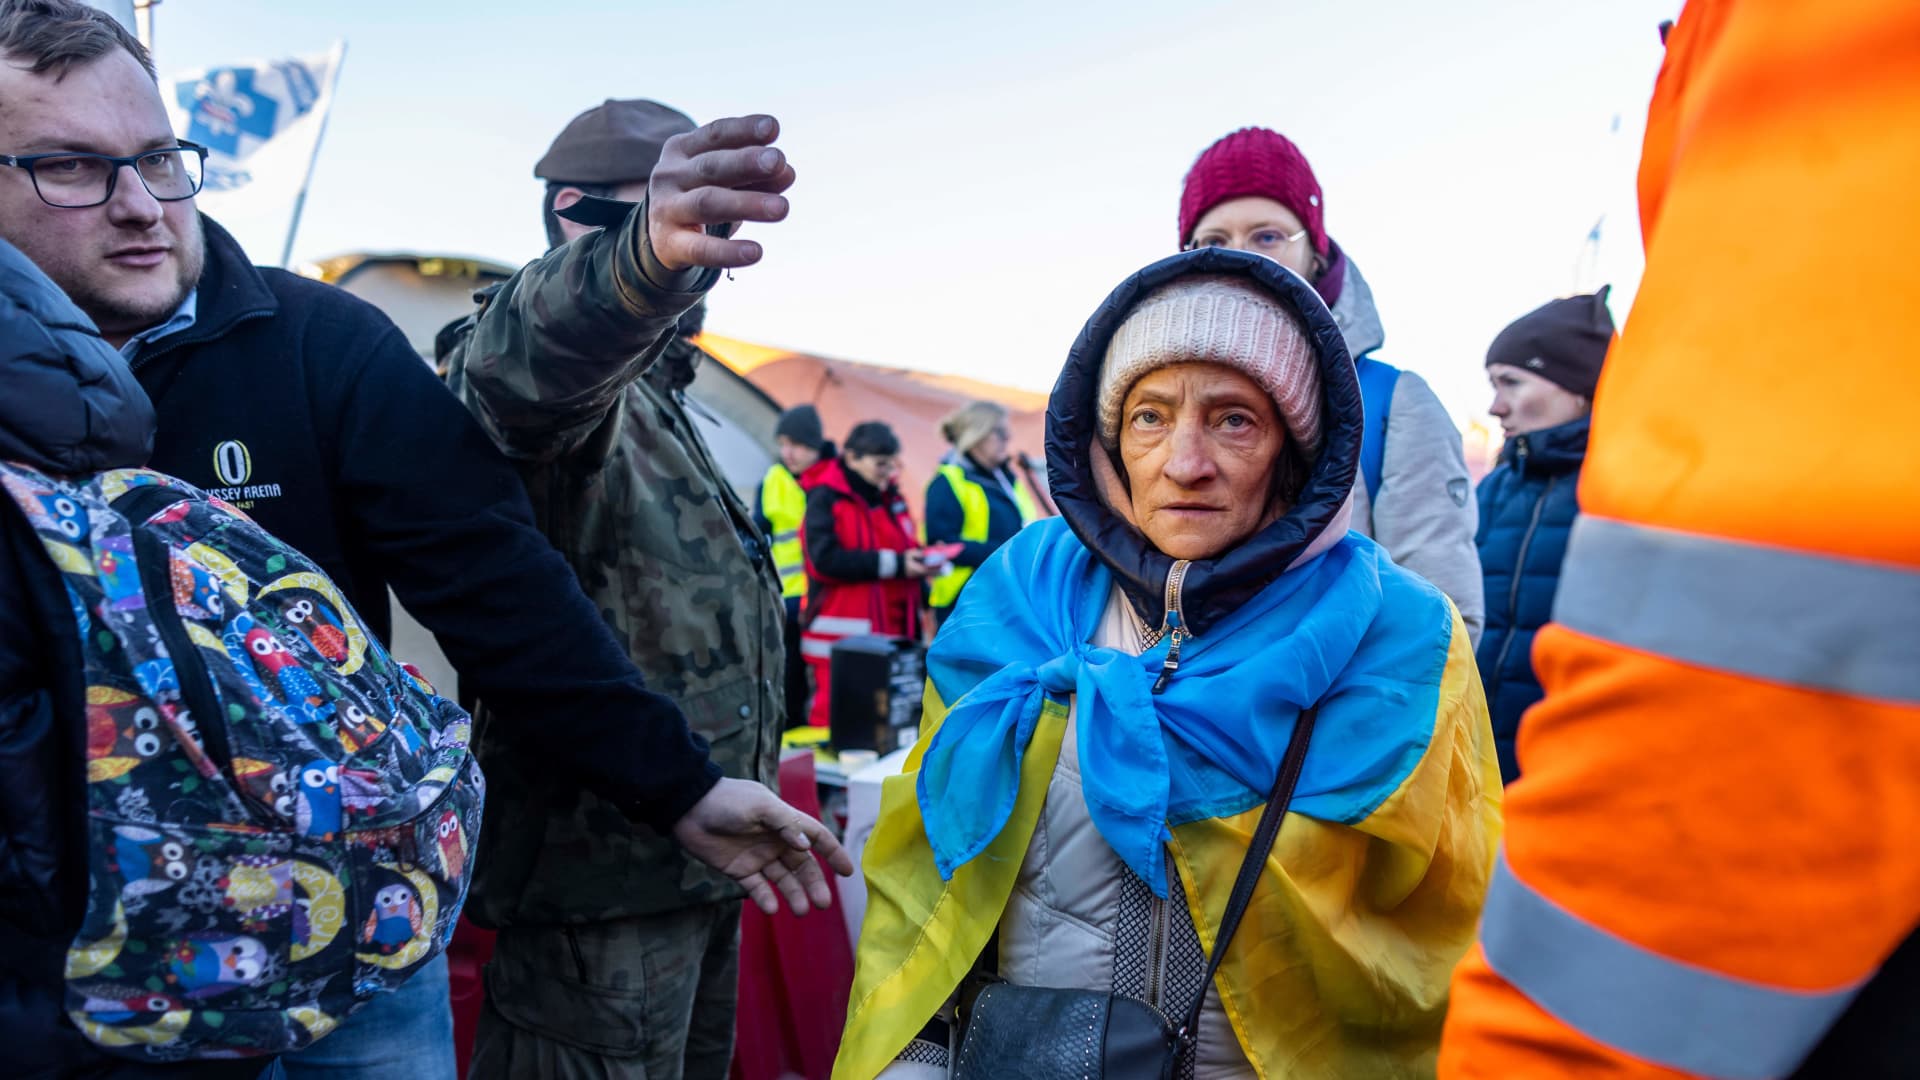 People, including an elderly woman wearing a Unkraine flag, line up to get into the buses for further transportation at the Medyka Polish-Ukrainian border crossing on March 18, 2022.